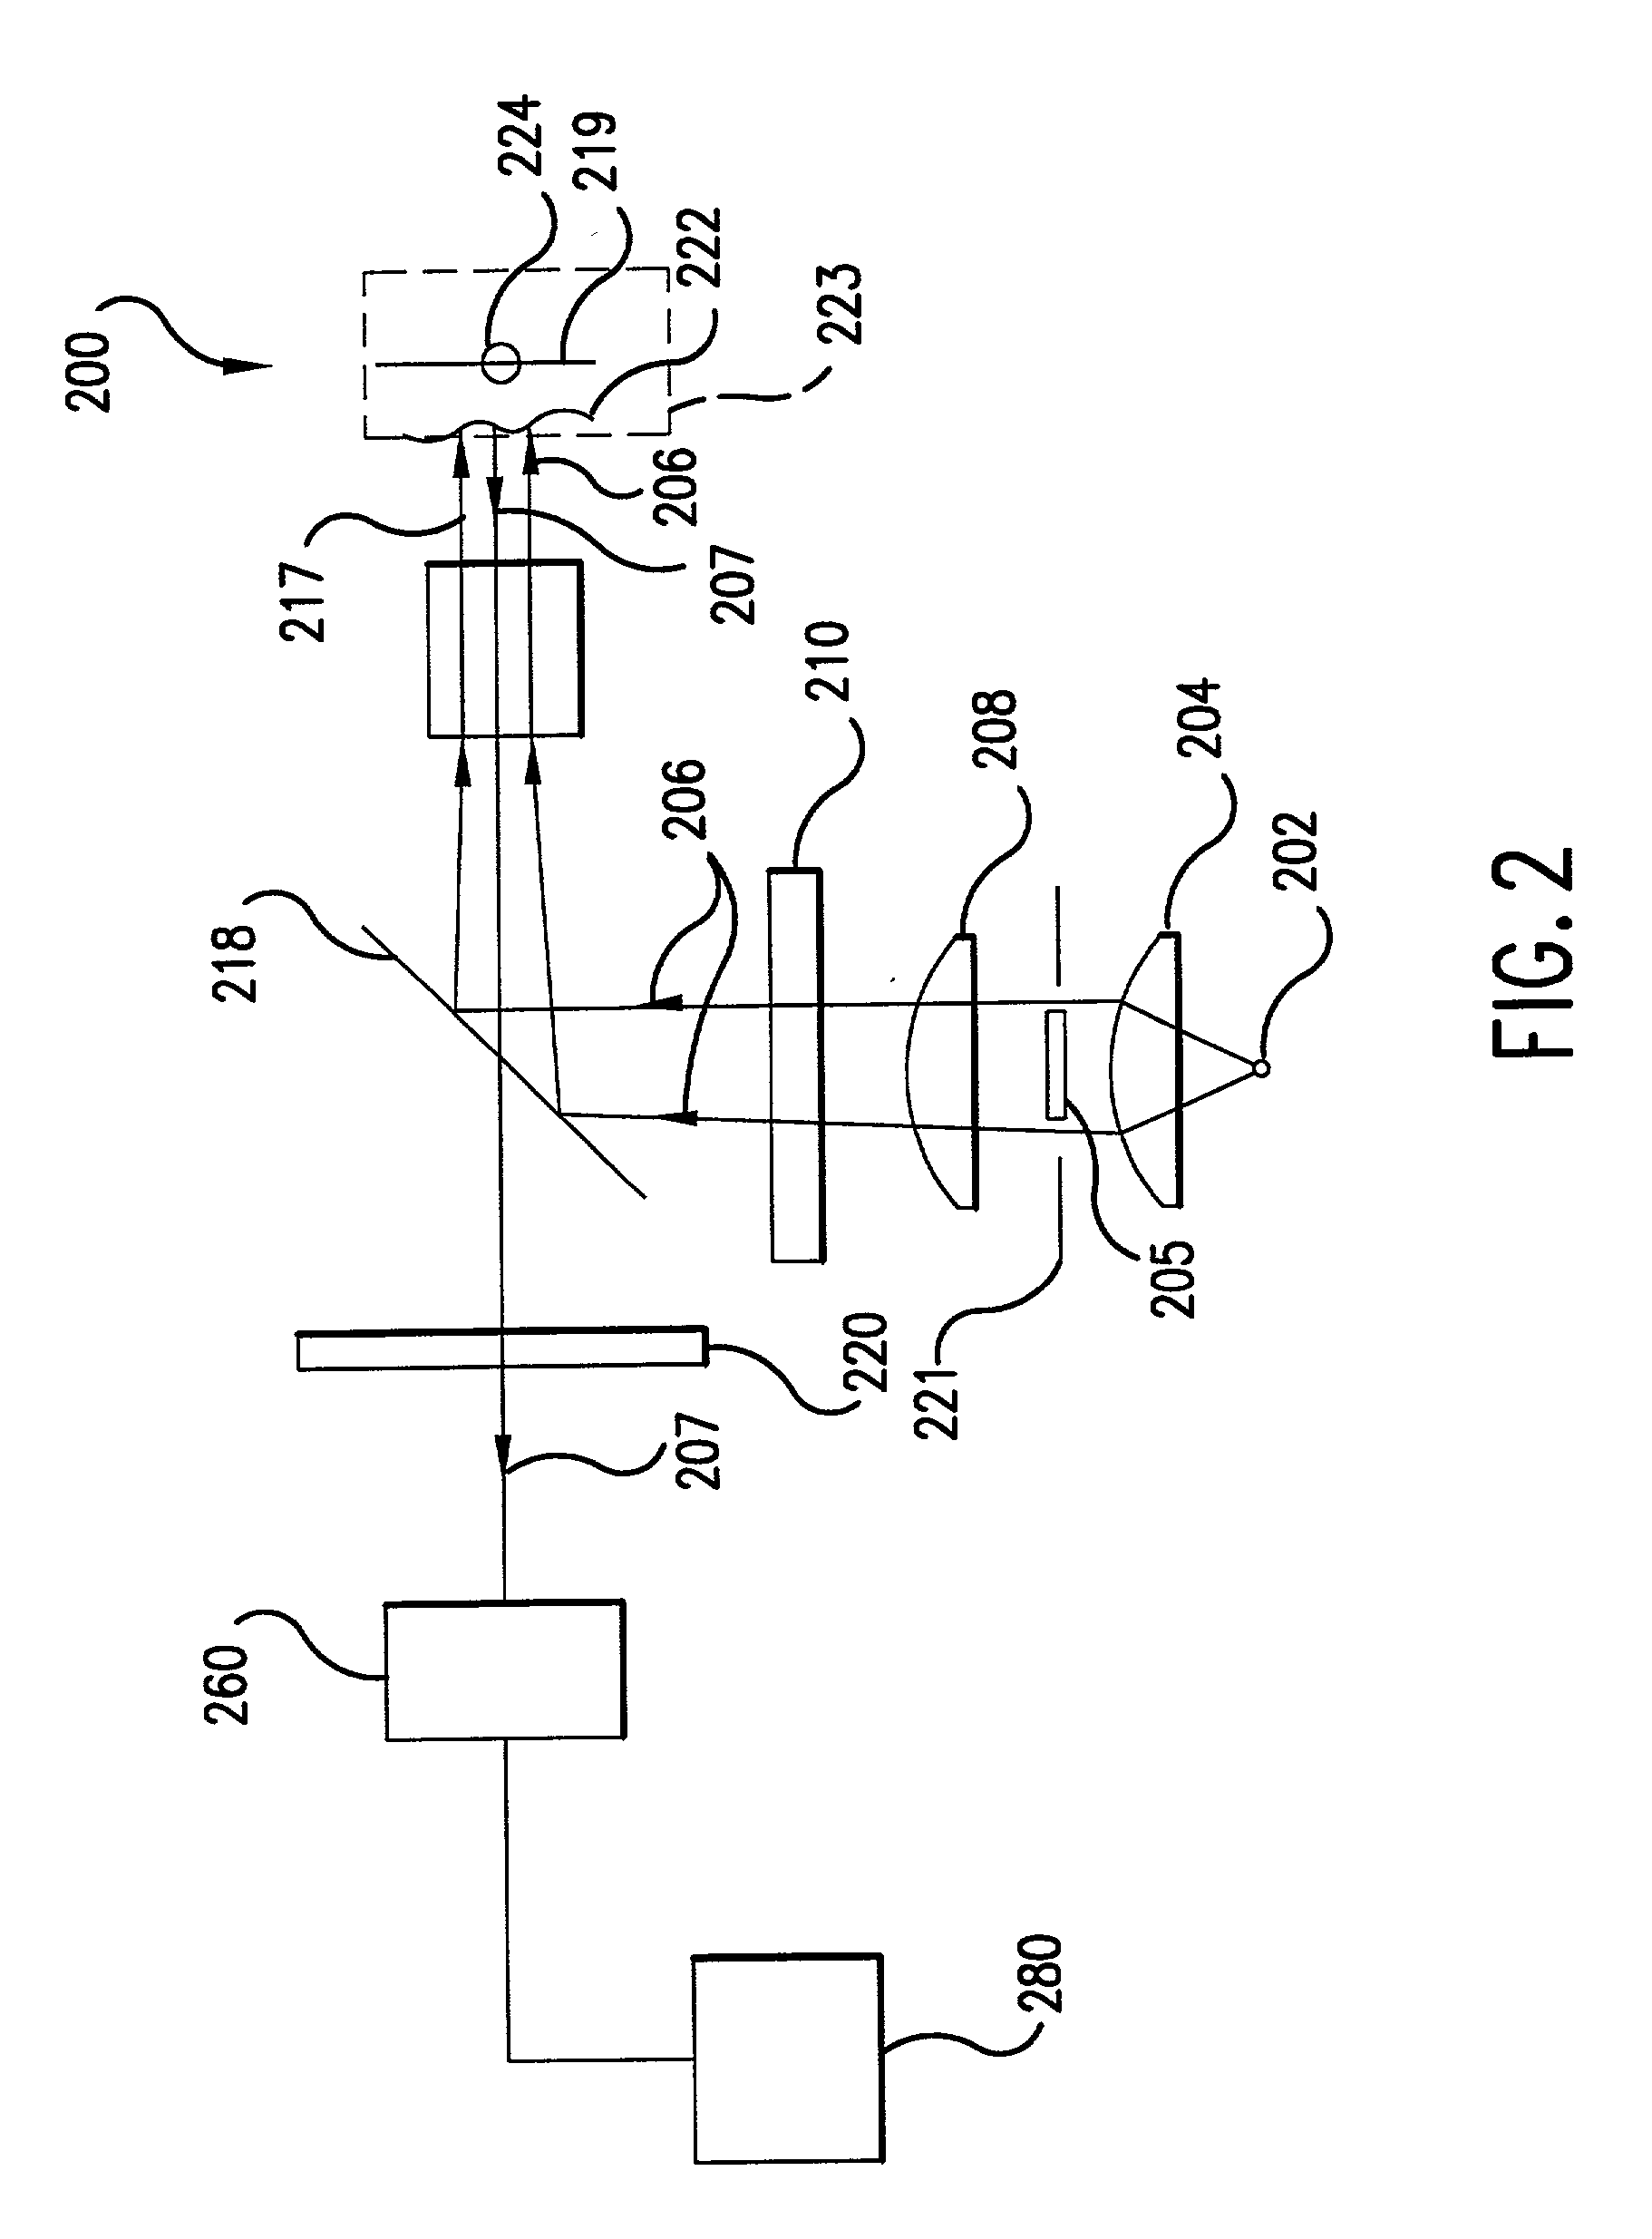 Method and apparatus for providing high contrast imaging